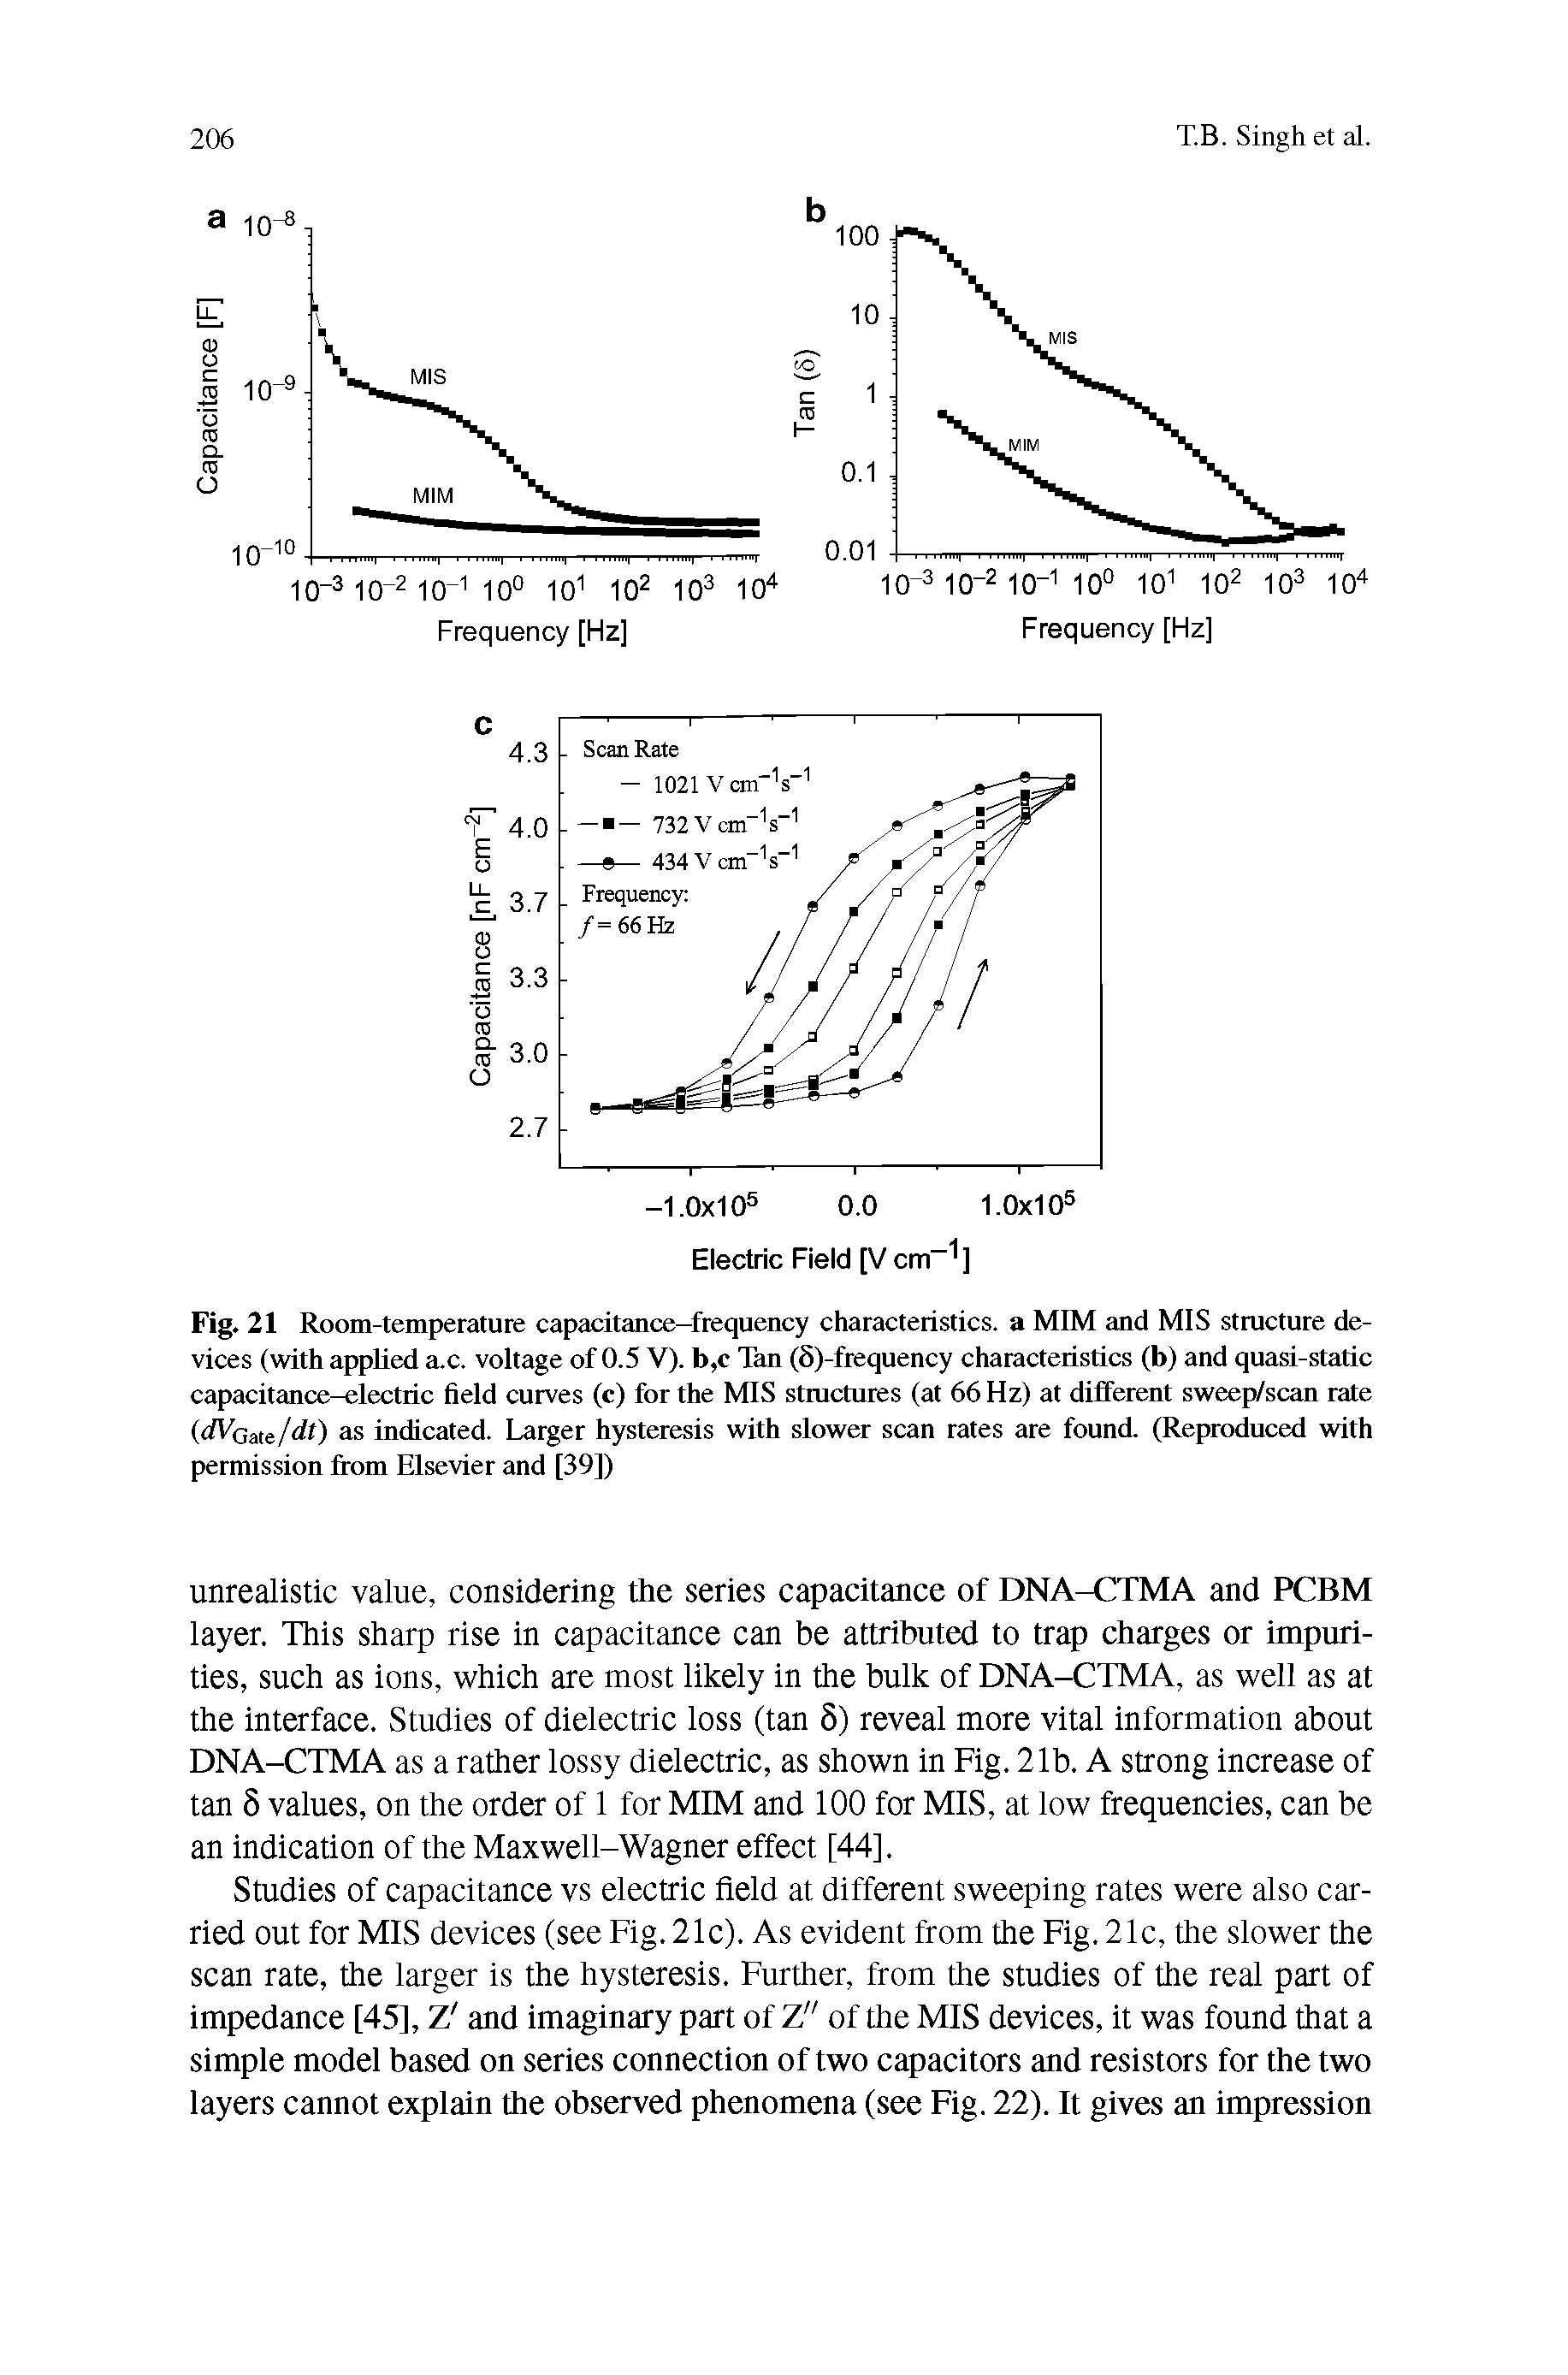 Fig. 21 Room-temperature capacitance-frequency characteristics, a MIM and MIS structure devices (with applied a.c. voltage of 0.5 V). b,c Tan (8)-frequency characteristics (b) and quasi-static capacitance-electric field curves (c) for the MIS stractures (at 66 Hz) at different sweep/scan rate (dVoM/dt) as indicated. Larger hysteresis with slower scan rates ace found. (Reproduced with permission from Elsevier and [39])...